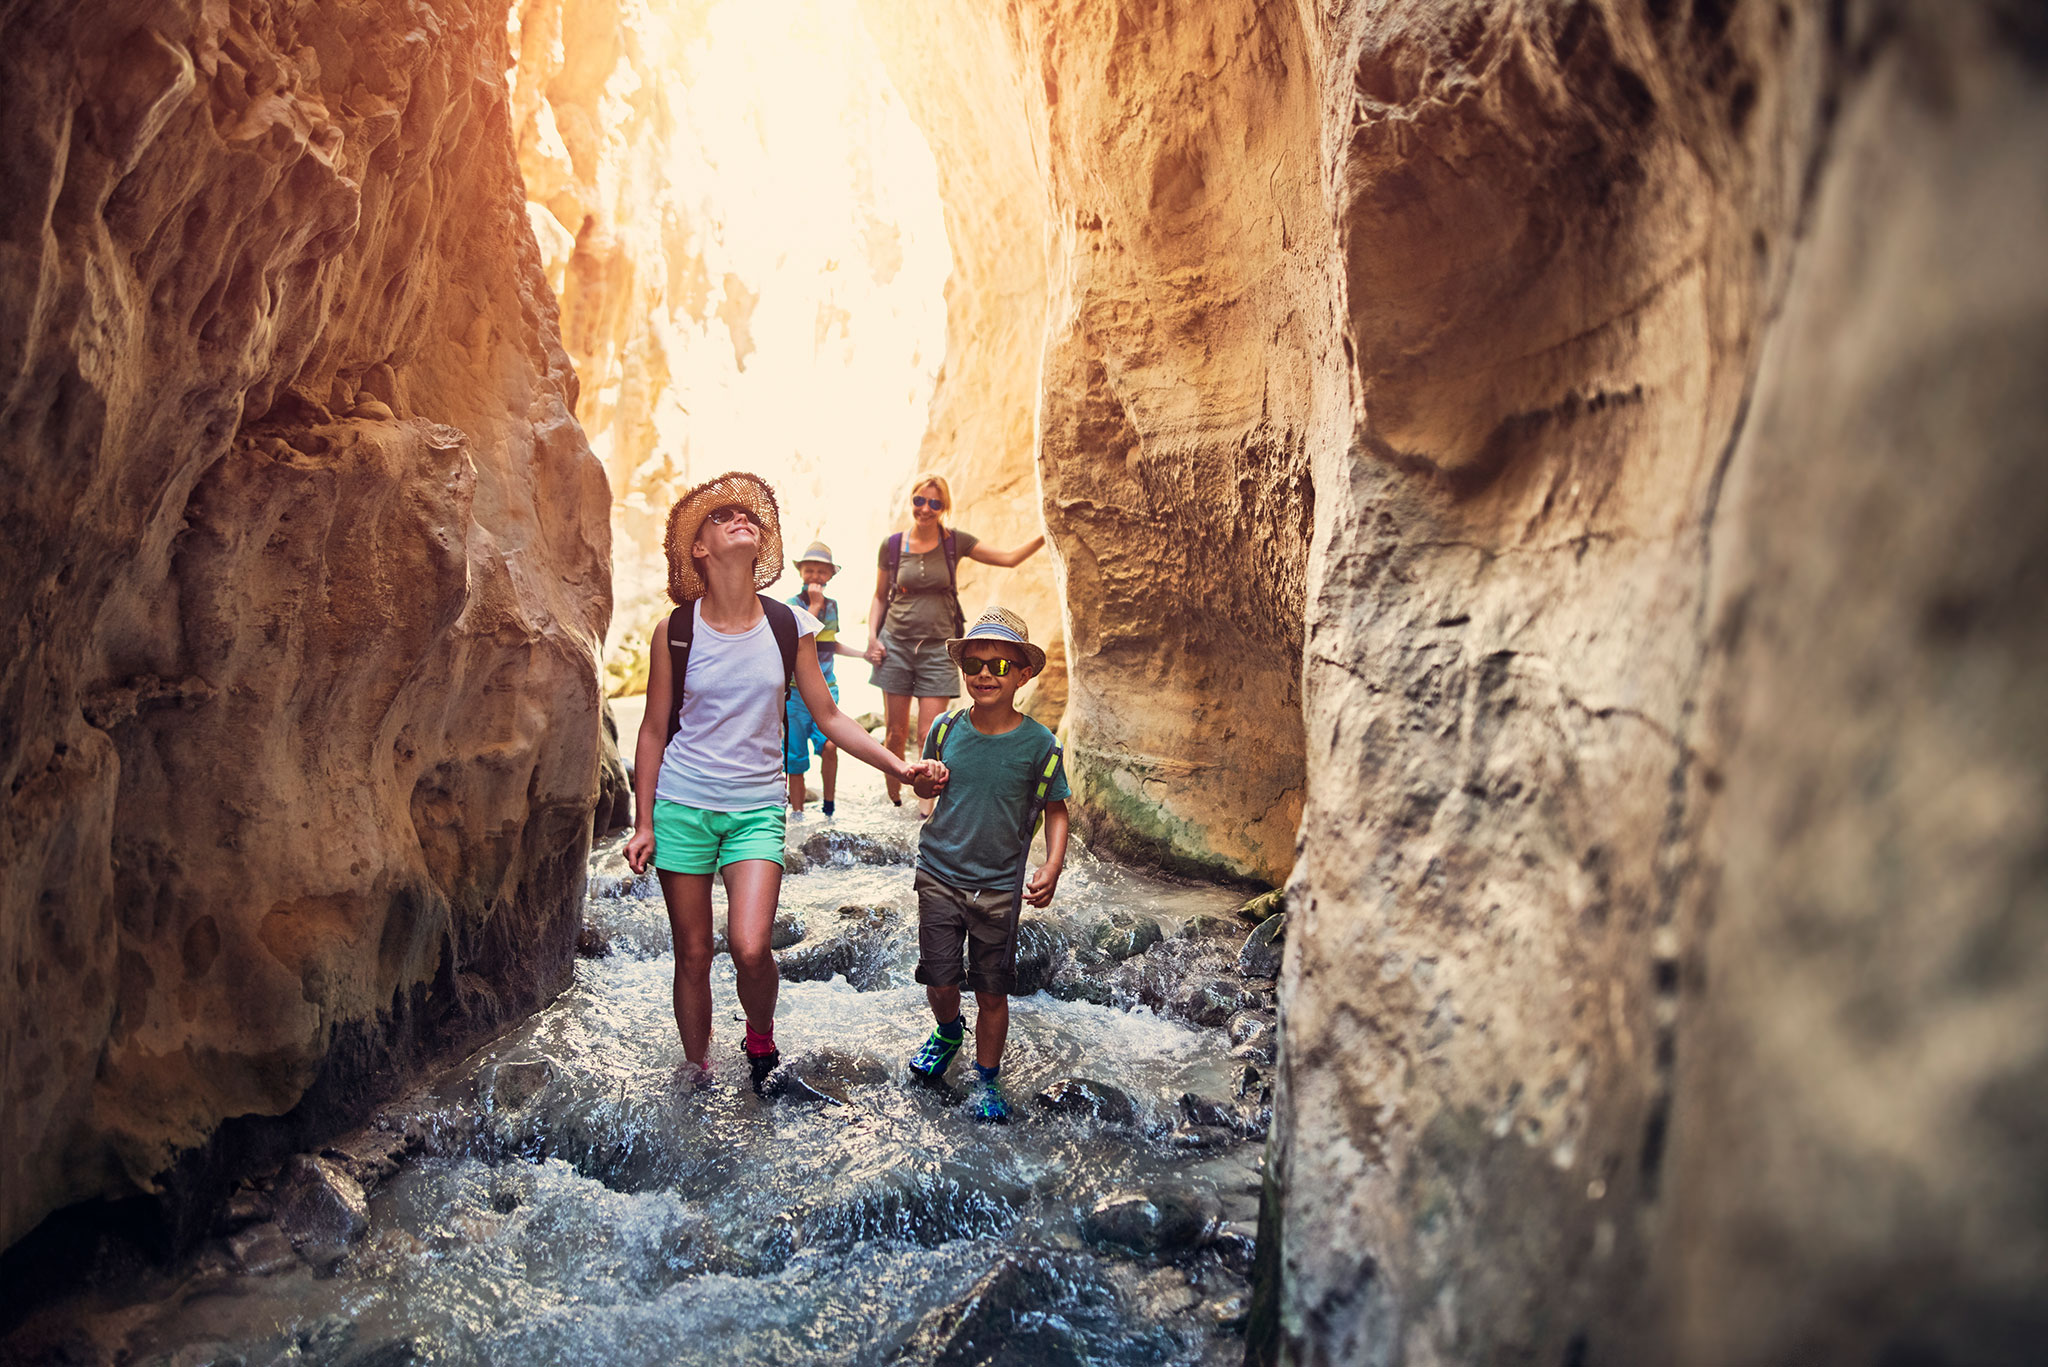 A mother and kids hike through the Rio Chillar flowing through a narrow canyon in Andalusia, Spain.